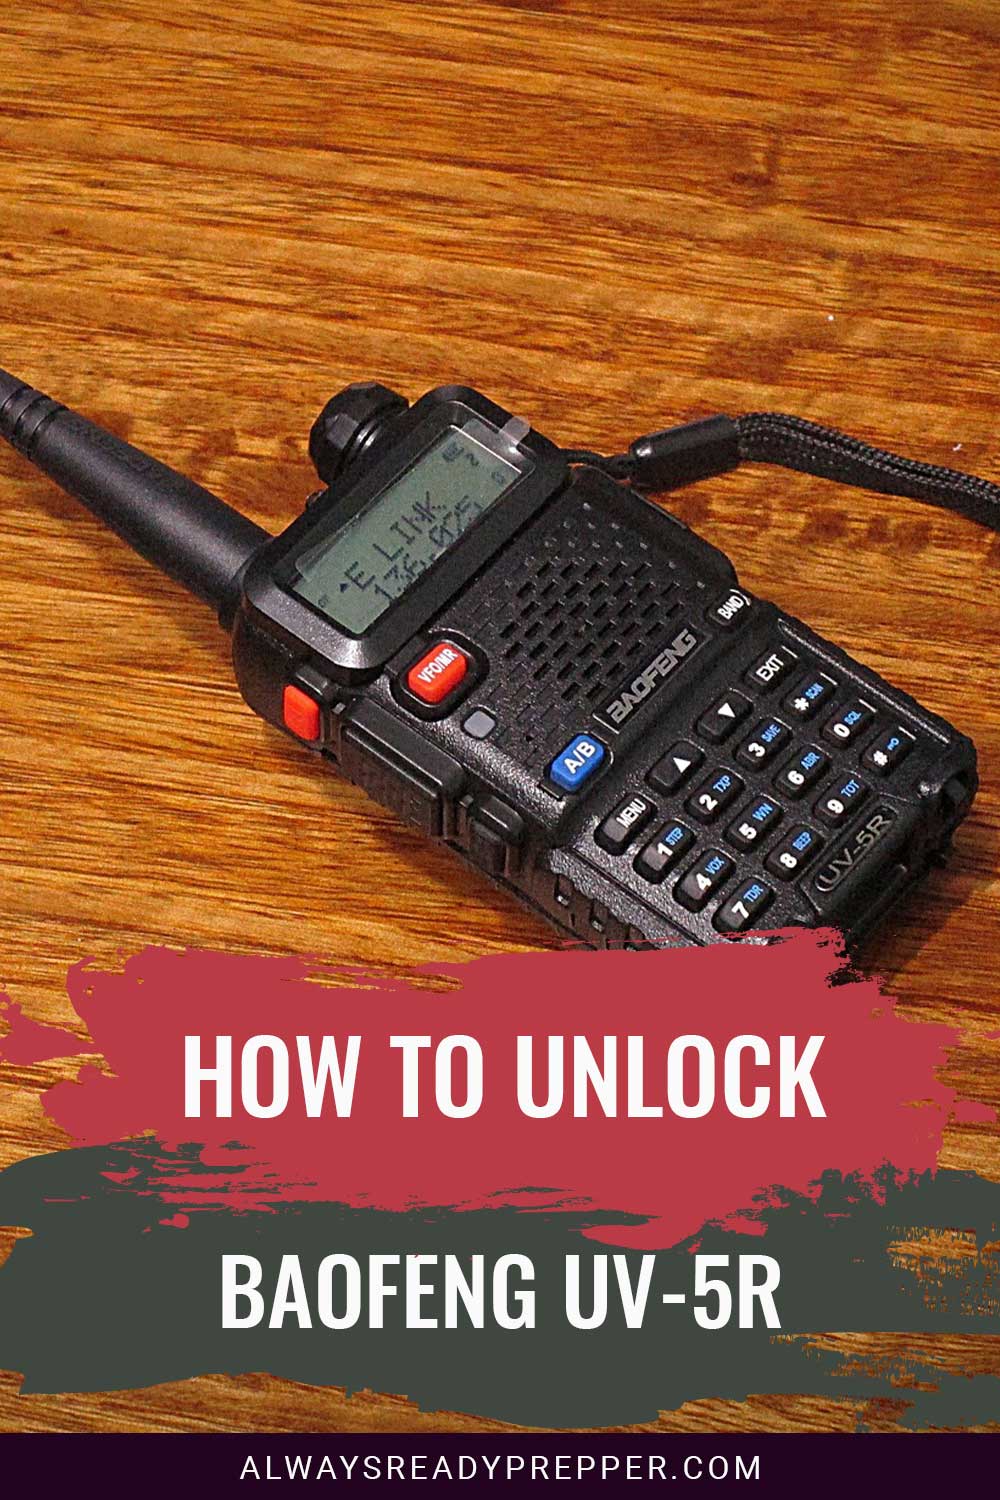 A Baofeng device lying on a wooden surface - How To Unlock Uv-5R?